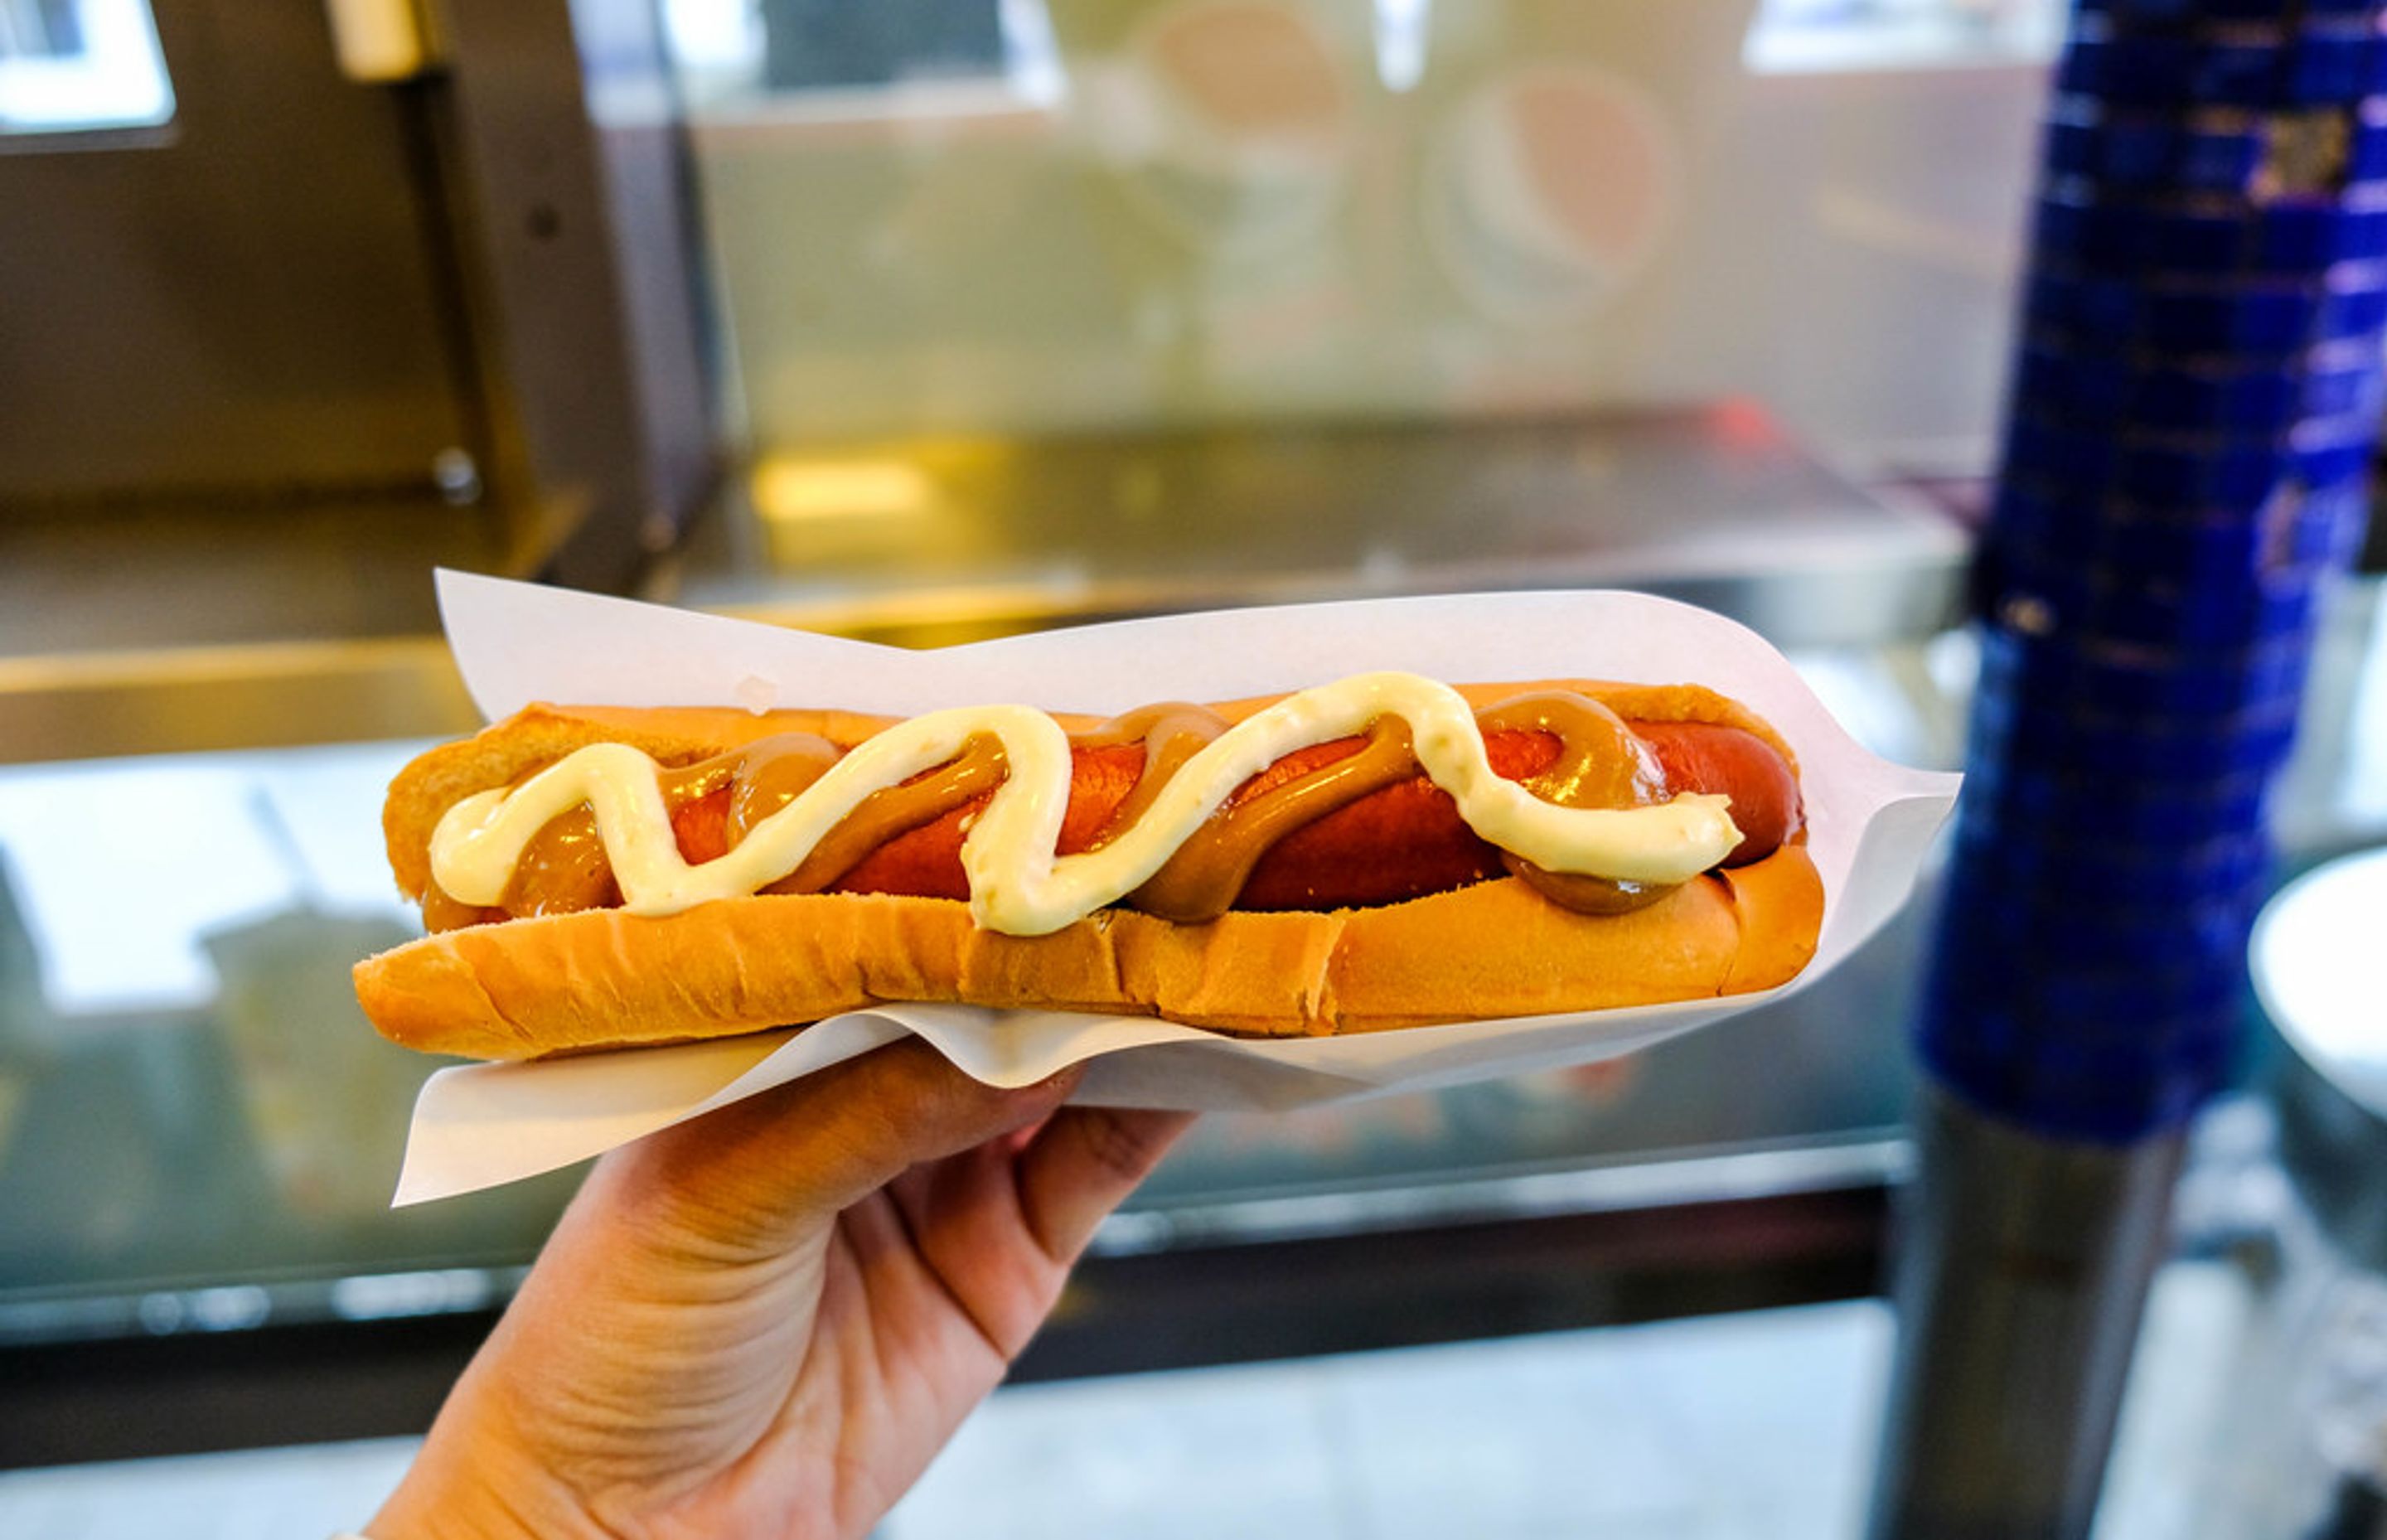 Traditional Icelandic food. A Icelandic Hot Dog with everything.